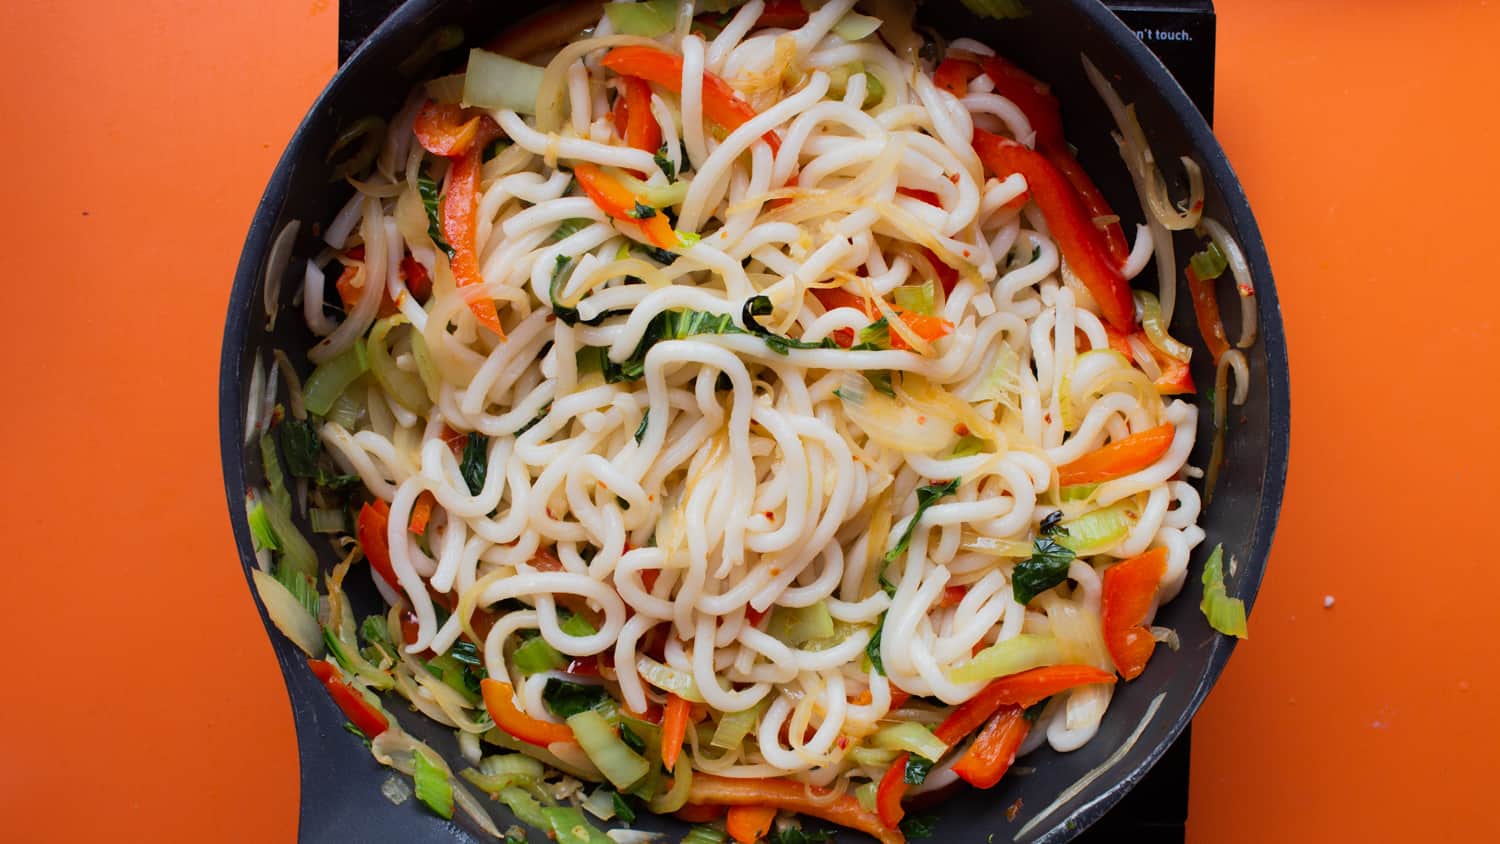 Udon noodles, sliced peppers, onions and pak choi mixed together in a frying pan on a cooker on an orange background.